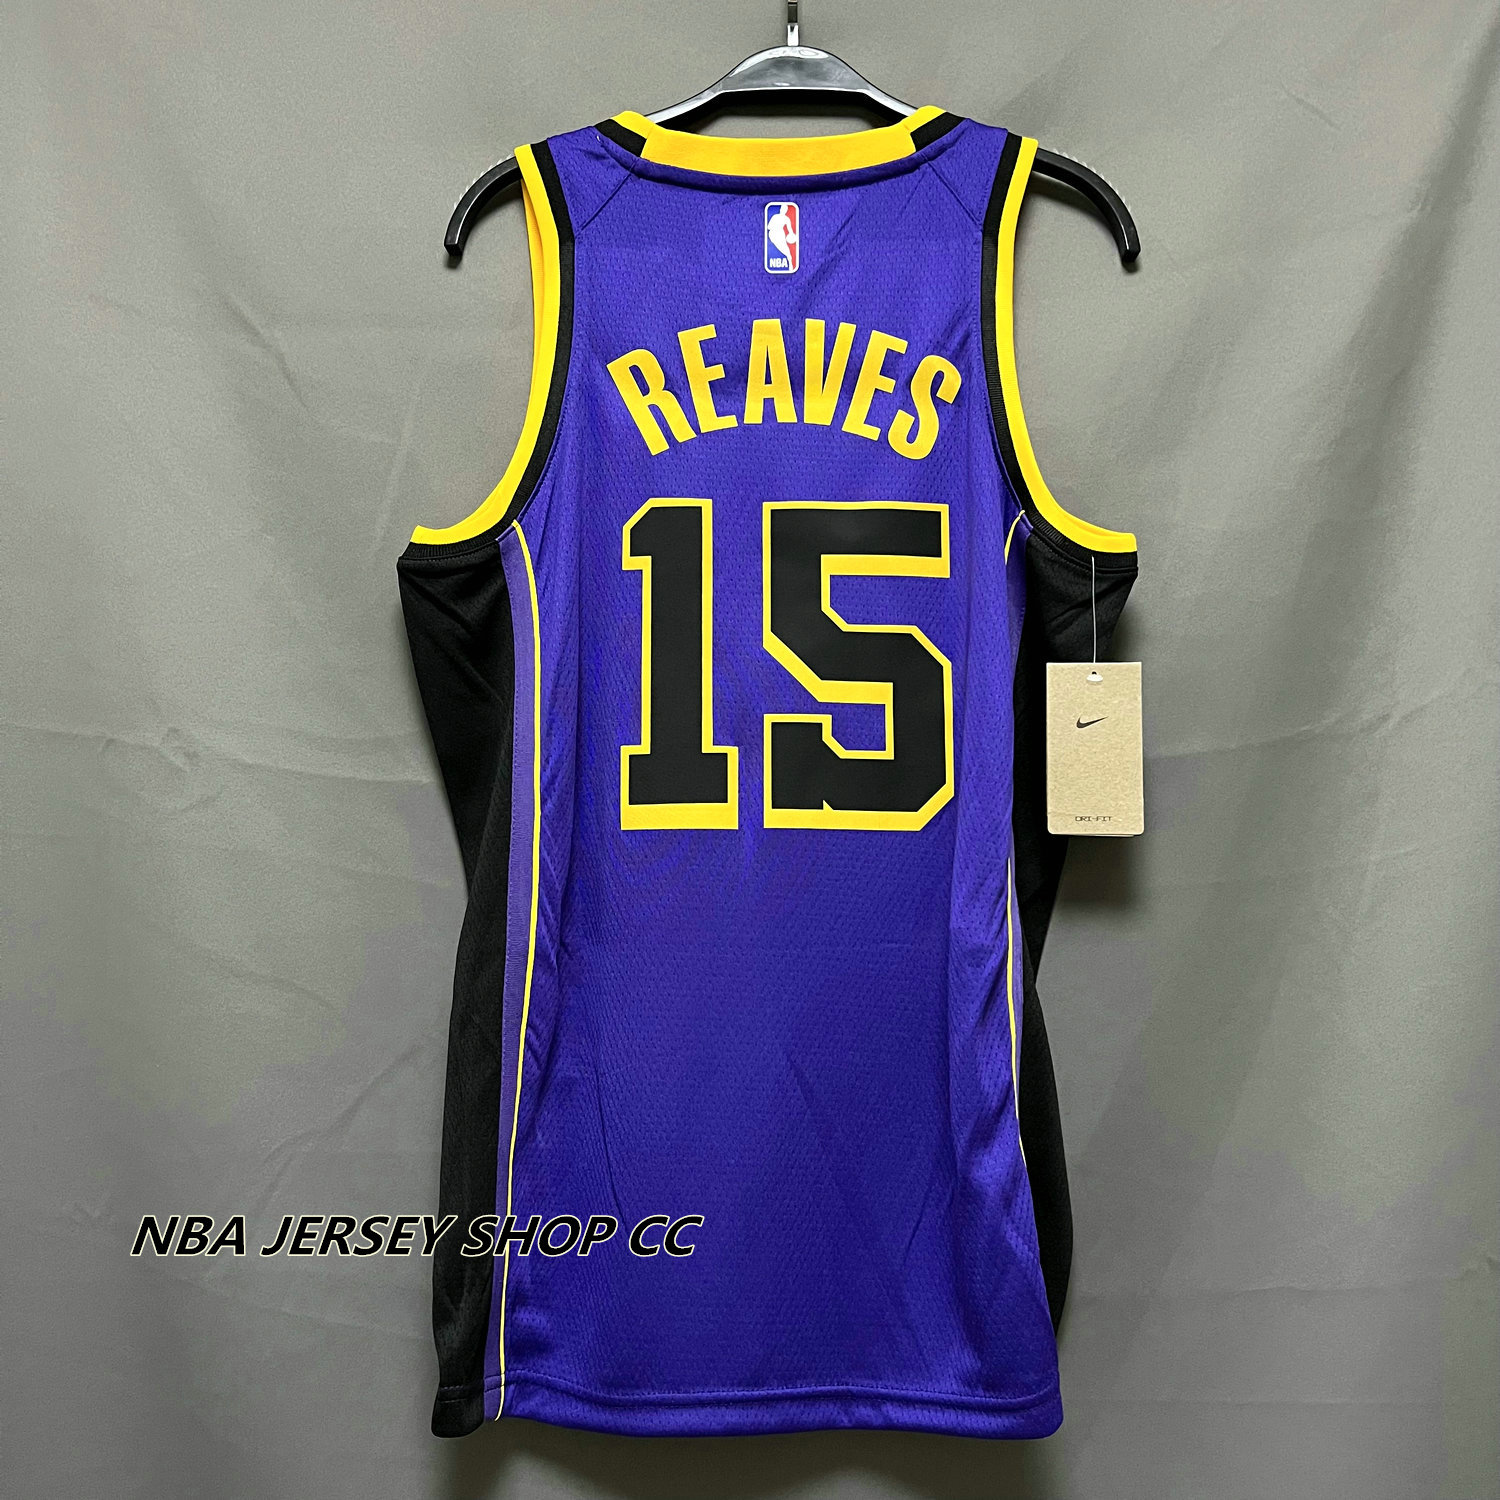 US$ 26.00 - 23-24 LAKERS REAVES #15 Black City Edition Top Quality Hot  Pressing NBA Jersey - m.